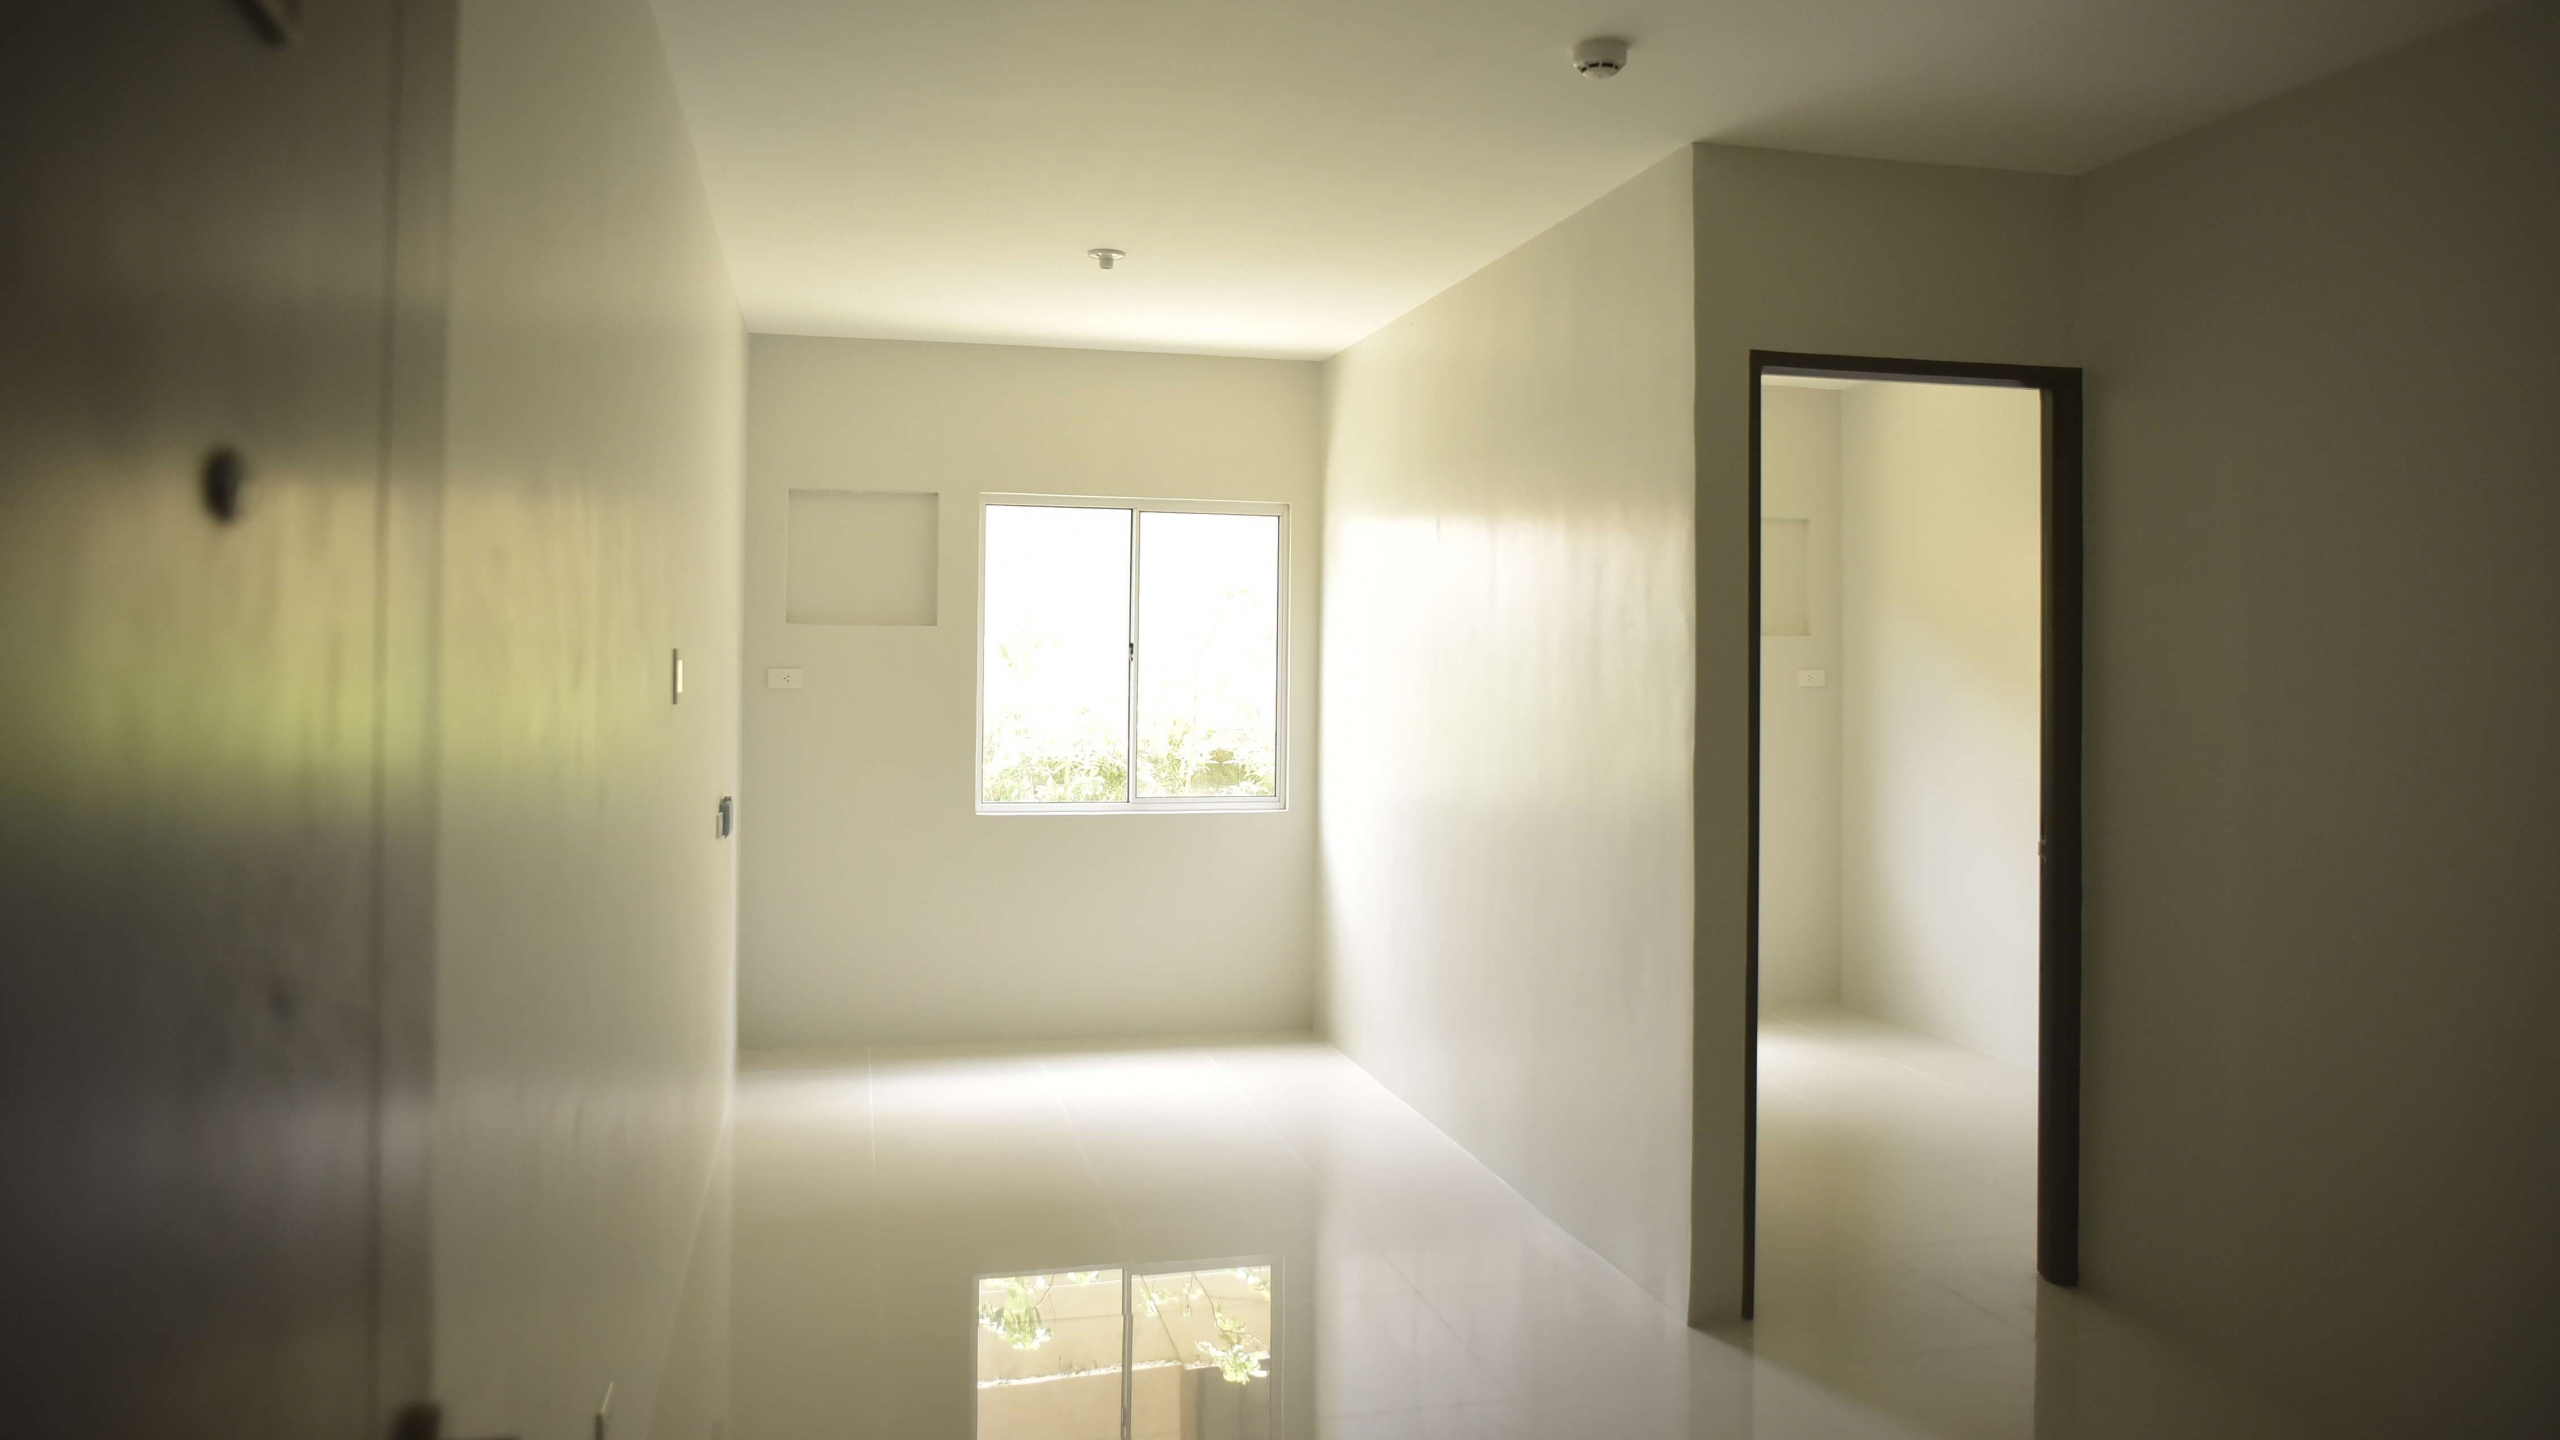 Deliverable unit 1 Bedroom of Manors Bacolod